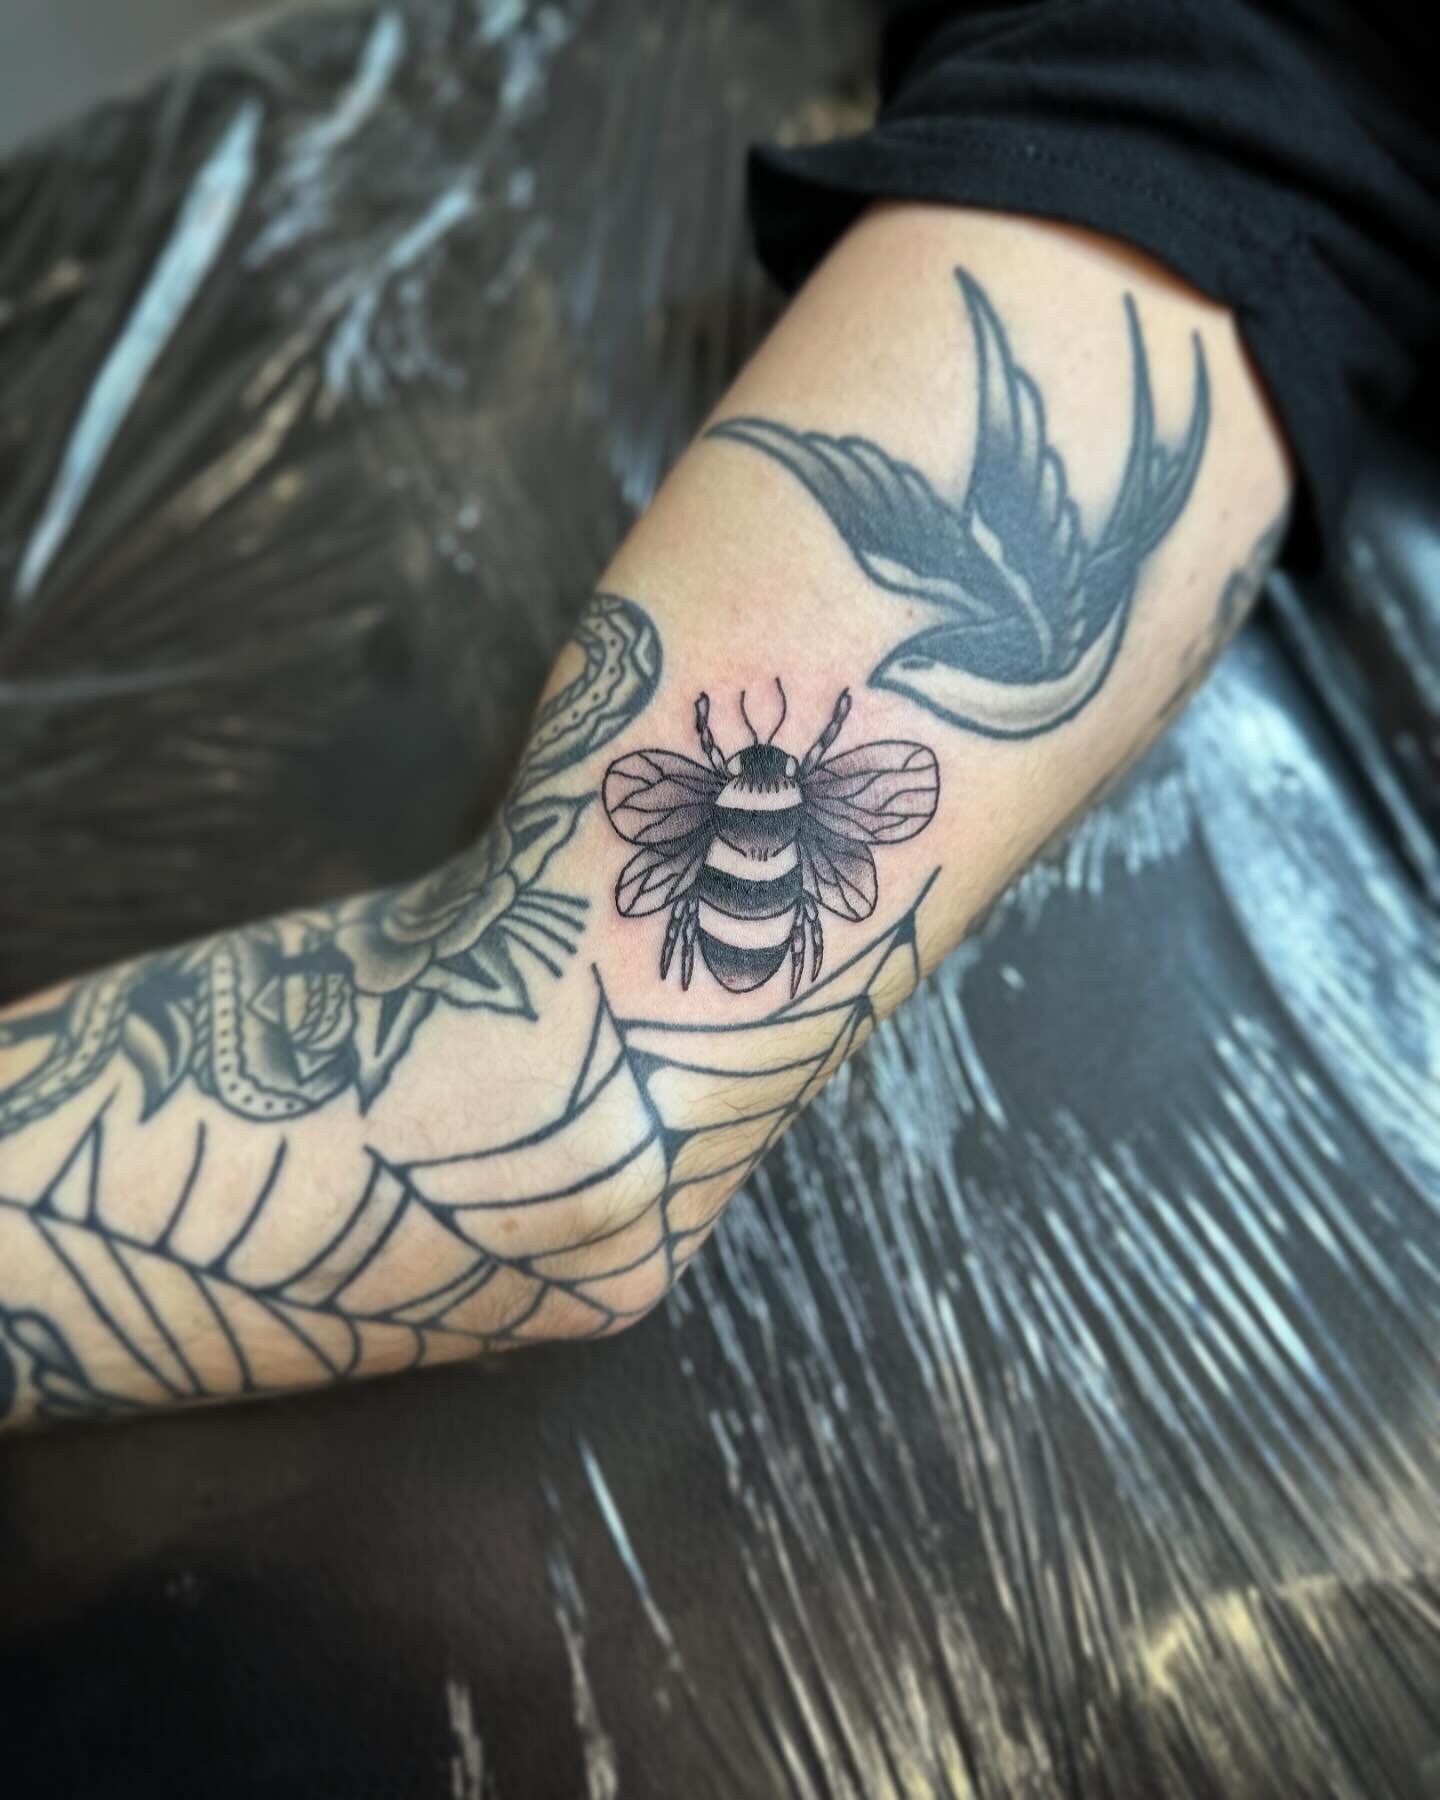 Fun lil bee from my get what you get. Few spots left in March message me to set something up